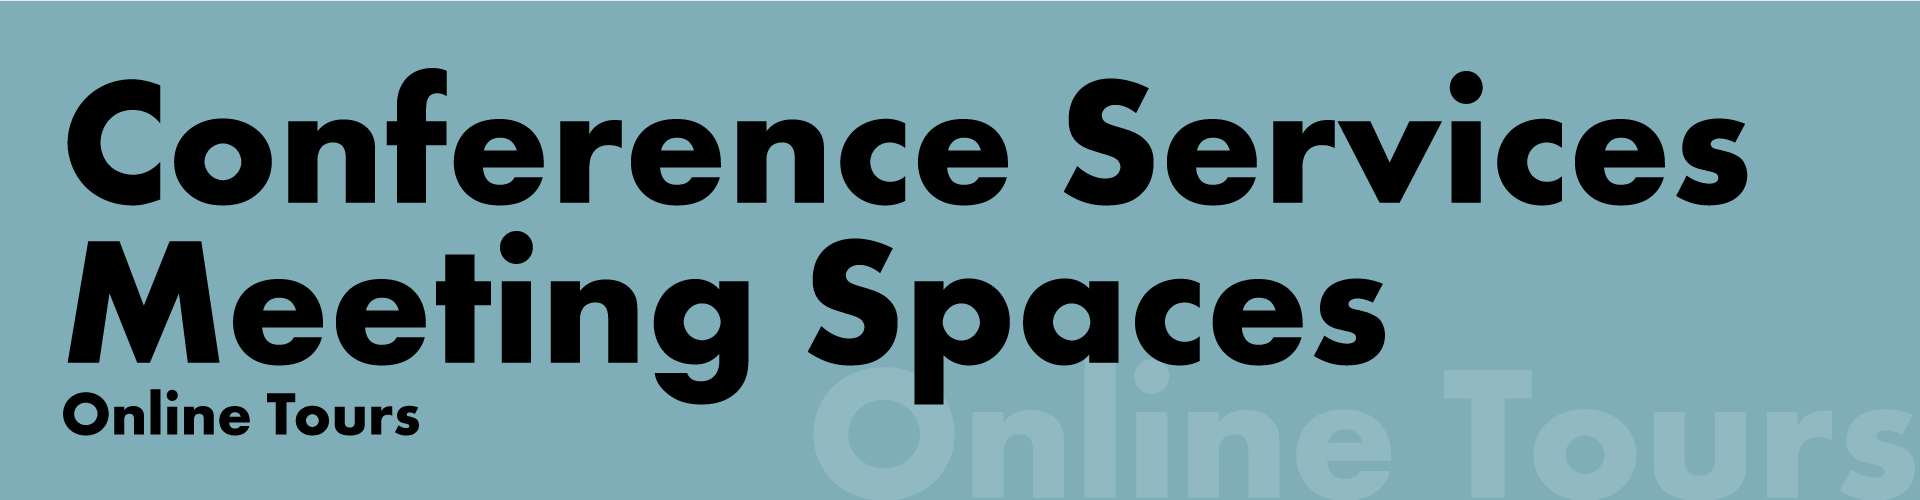 Conference Services Meeting Spaces - Online Tours Banner